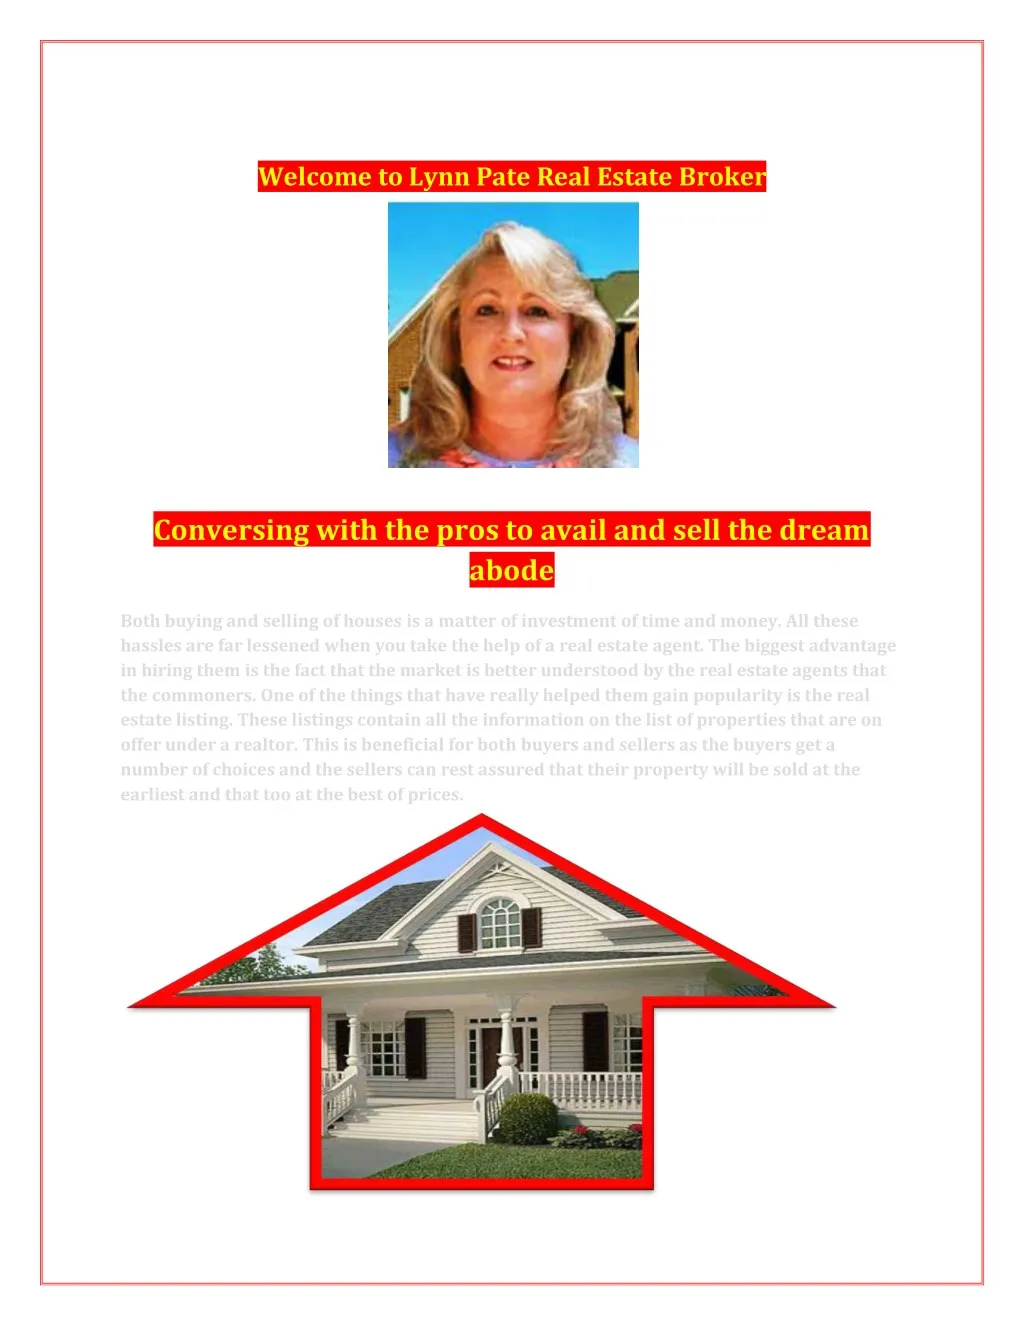 welcome to lynn pate real estate broker